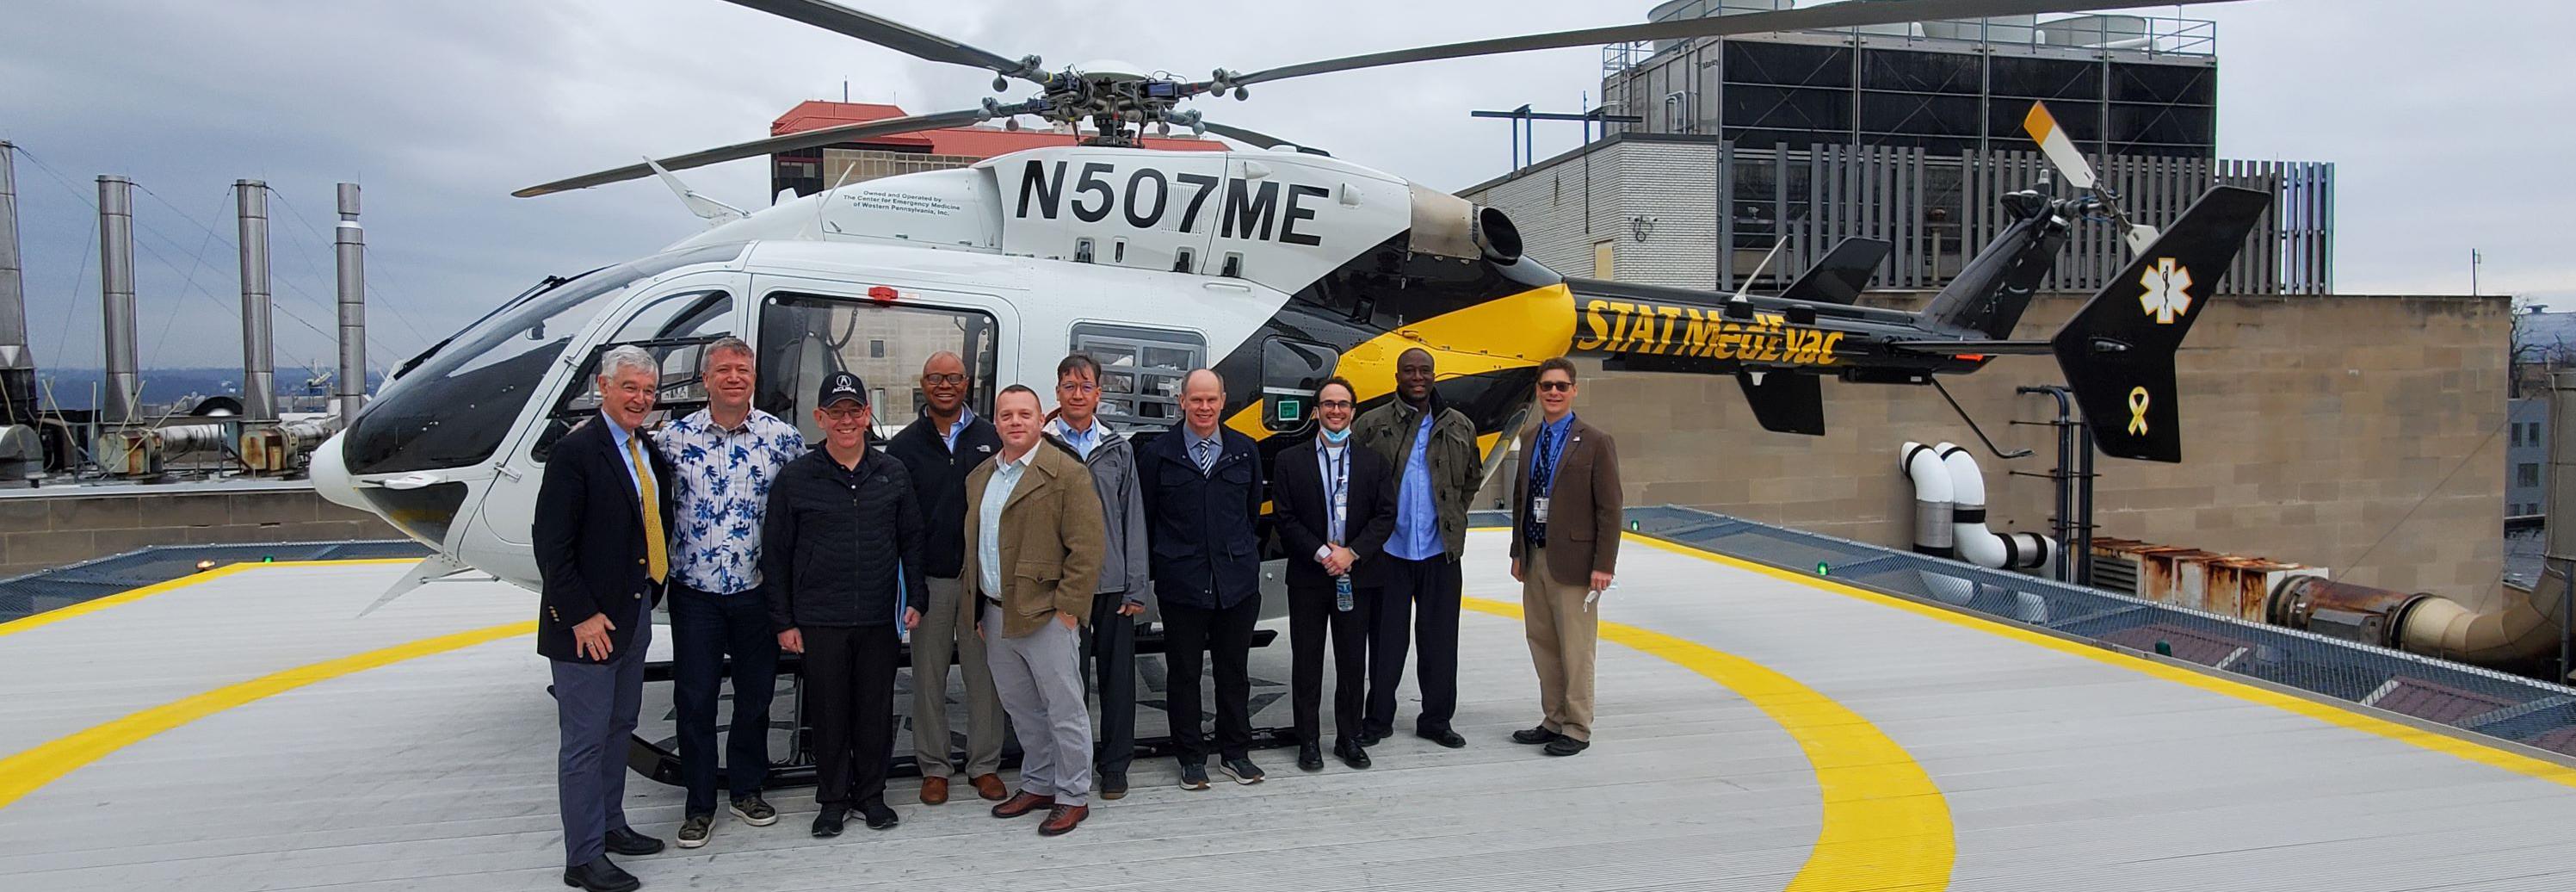 Group of people in front of a helicopter